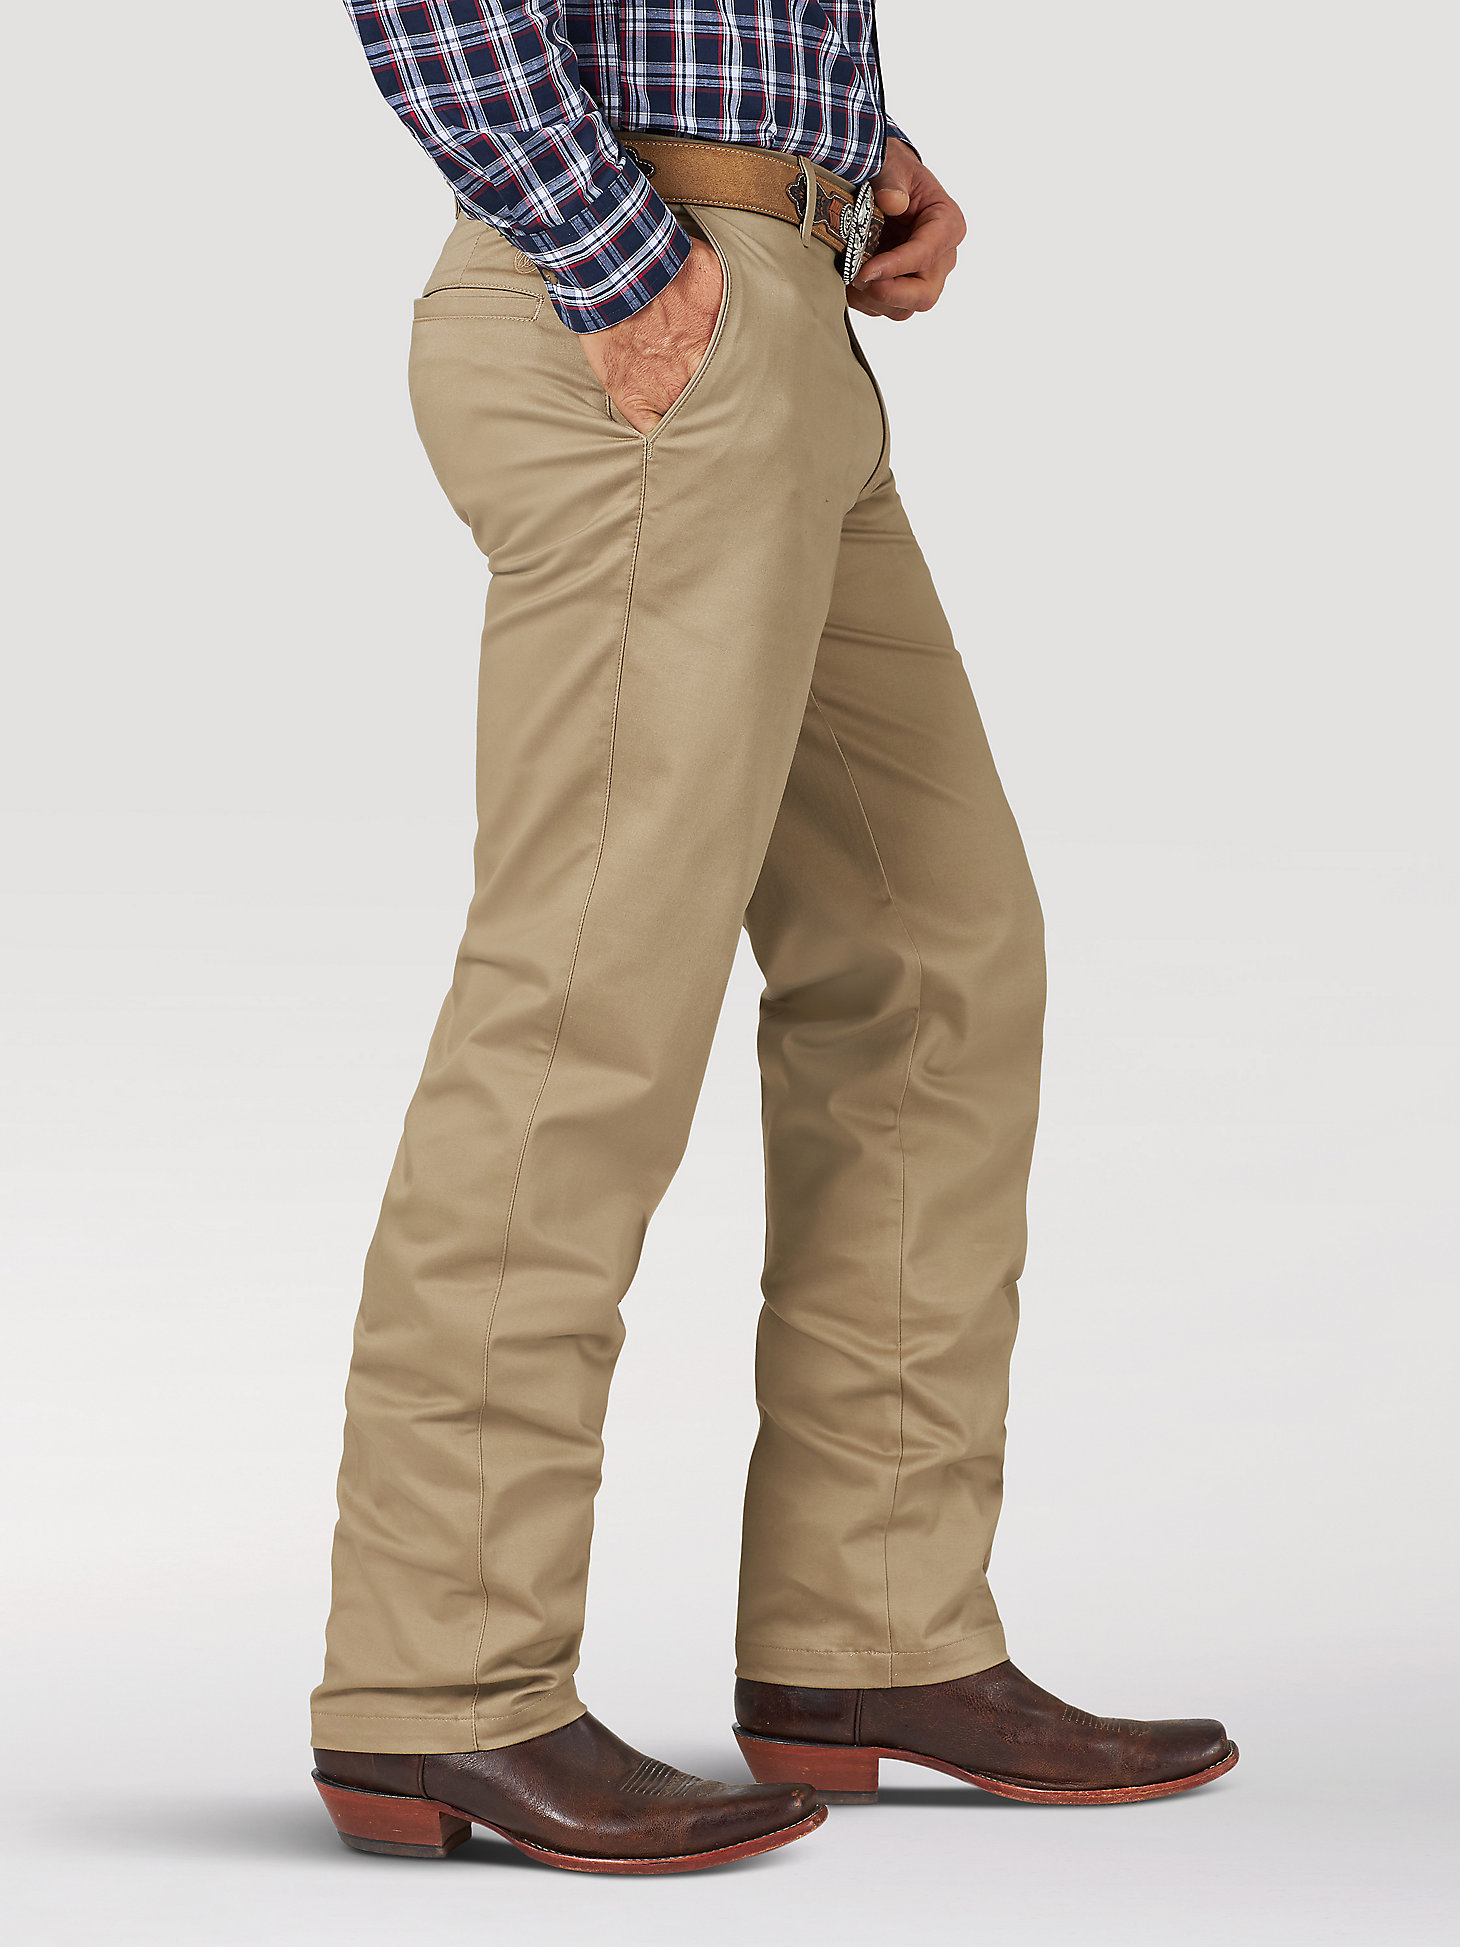 Men's Wrangler Casuals® Flat Front Relaxed Fit Pants in Khaki alternative view 1